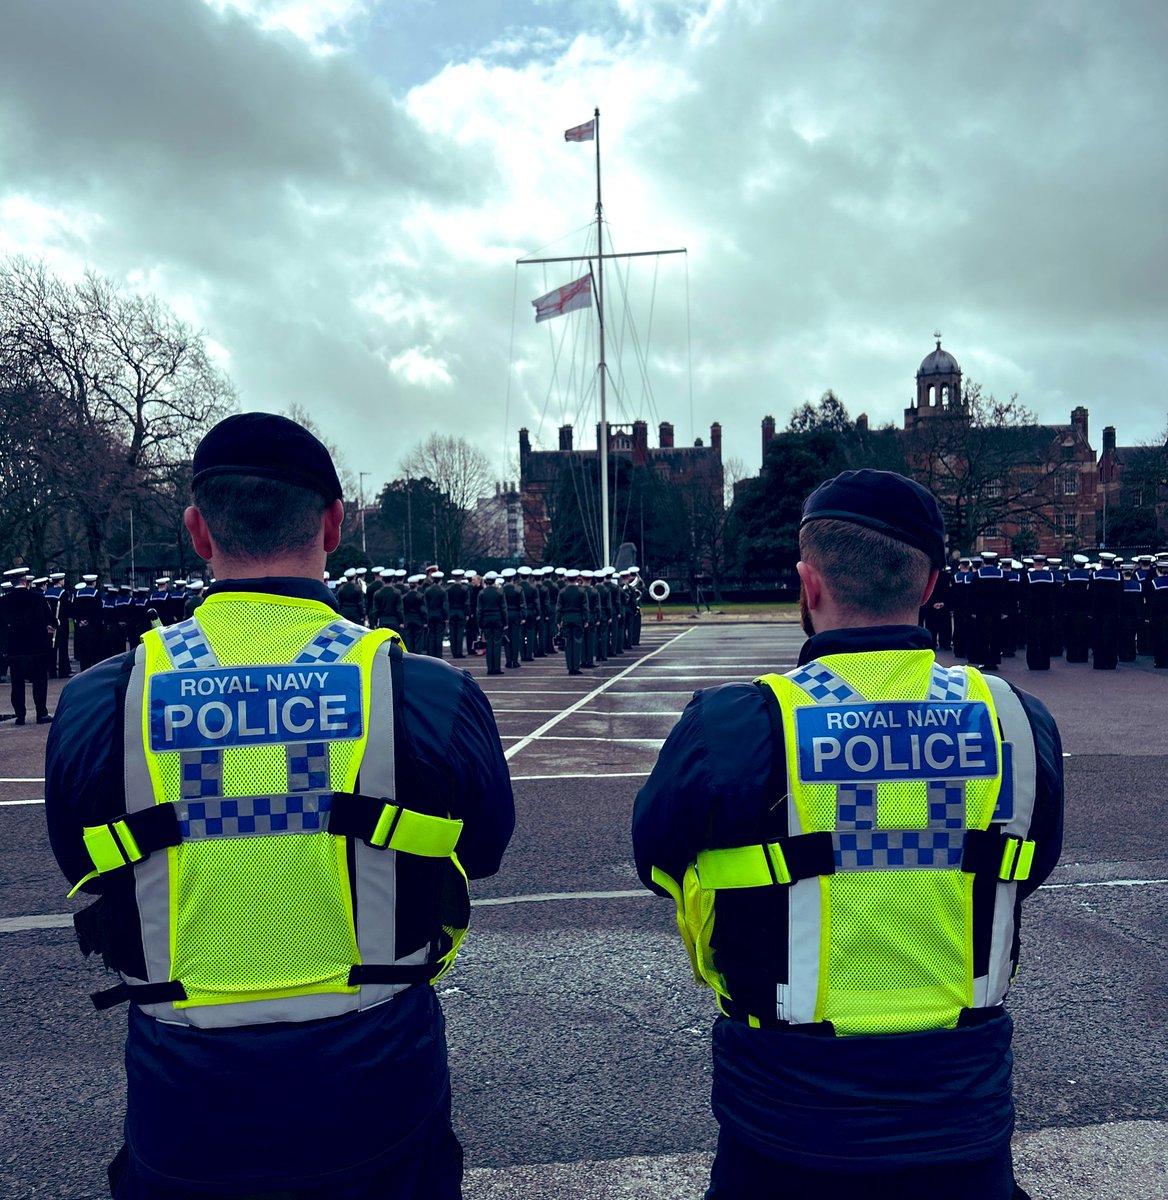 End of term divisions here at @HMNBPortsmouth today 🇬🇧 A busy parade with an appearance from @RMBandService 🥁 and presentation of awards. RNP here ensuring the parade went smoothly and safely with vehicle control through the Naval Base 🚘 #RN #Parade